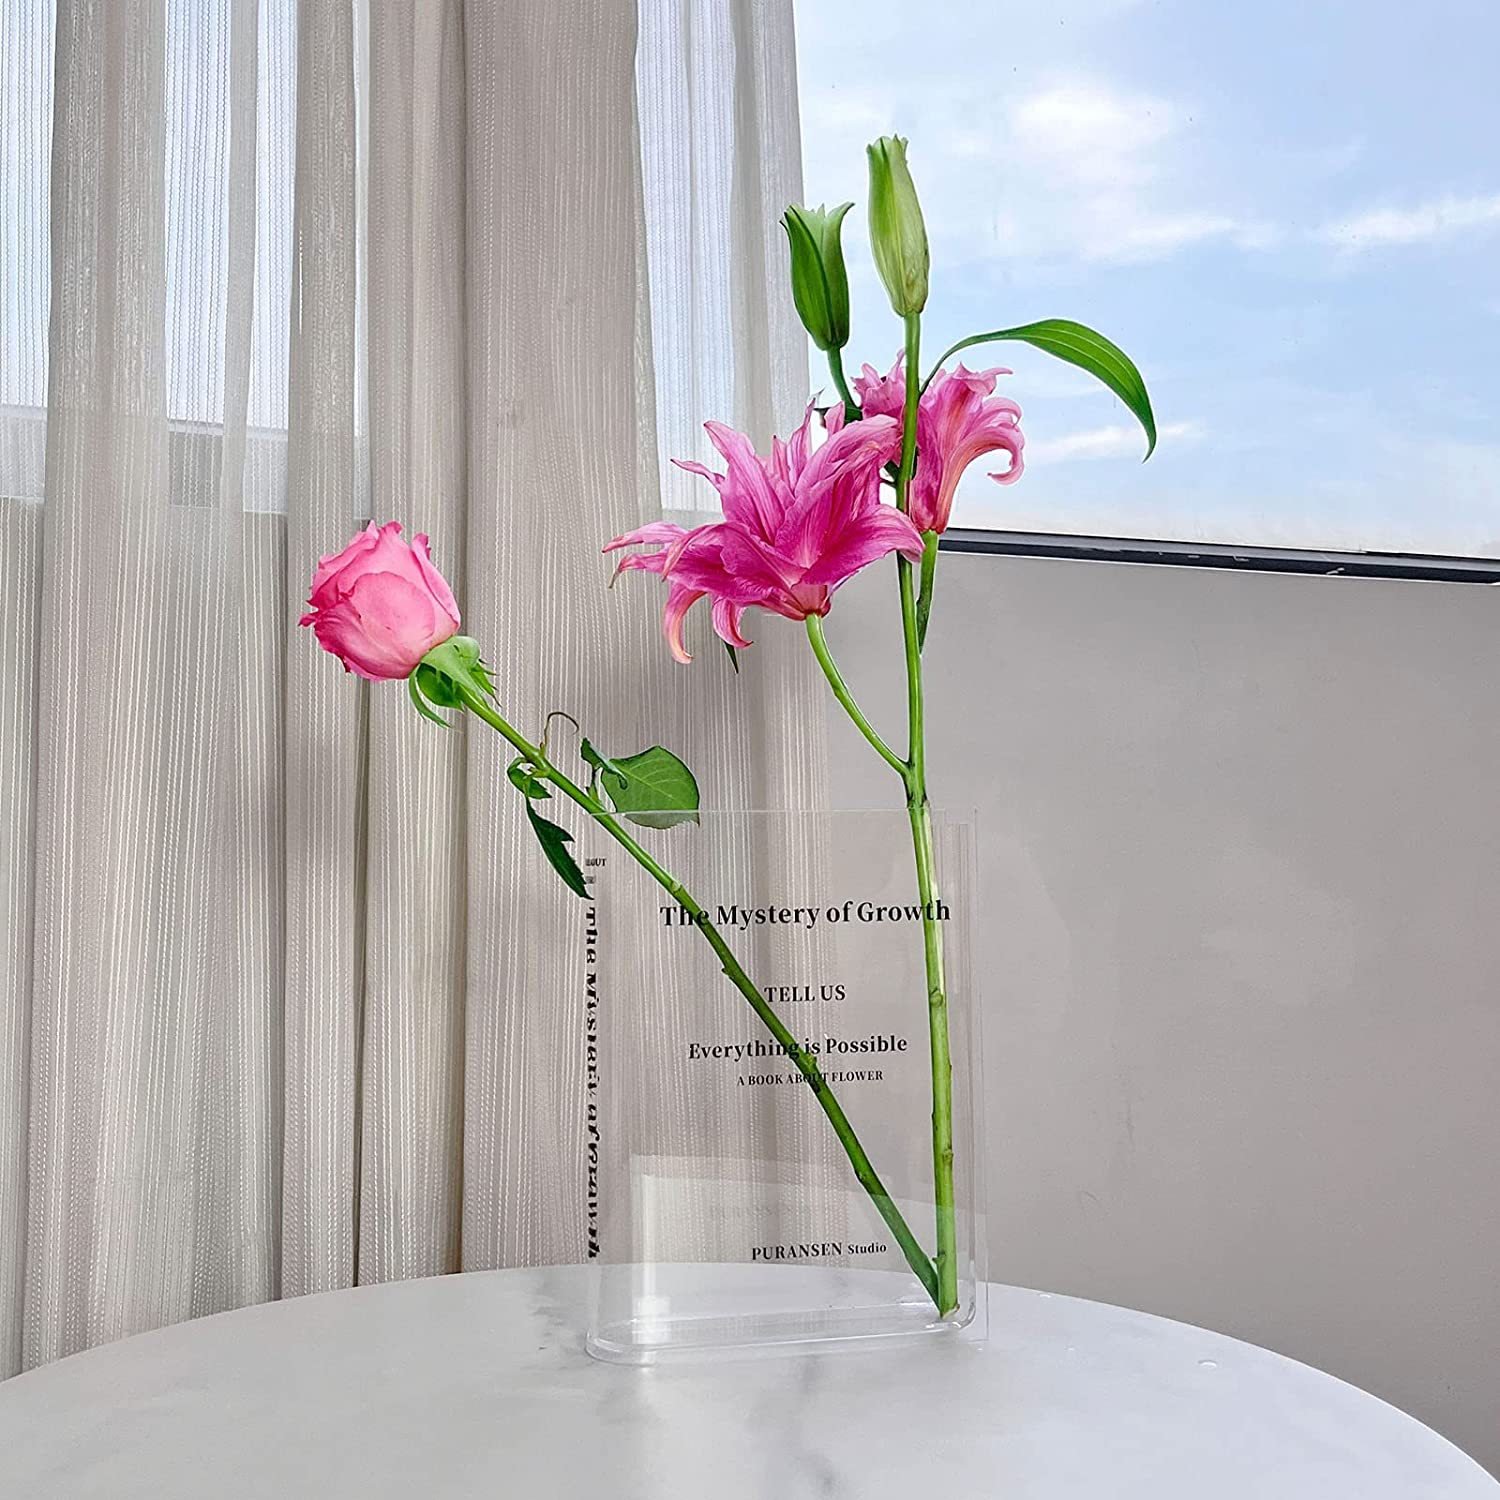 🔥Last Day Promotion 50% OFF - 🔥Acrylic Book Vase for Flowers(BUY 2 FREE SHIPPING NOW)